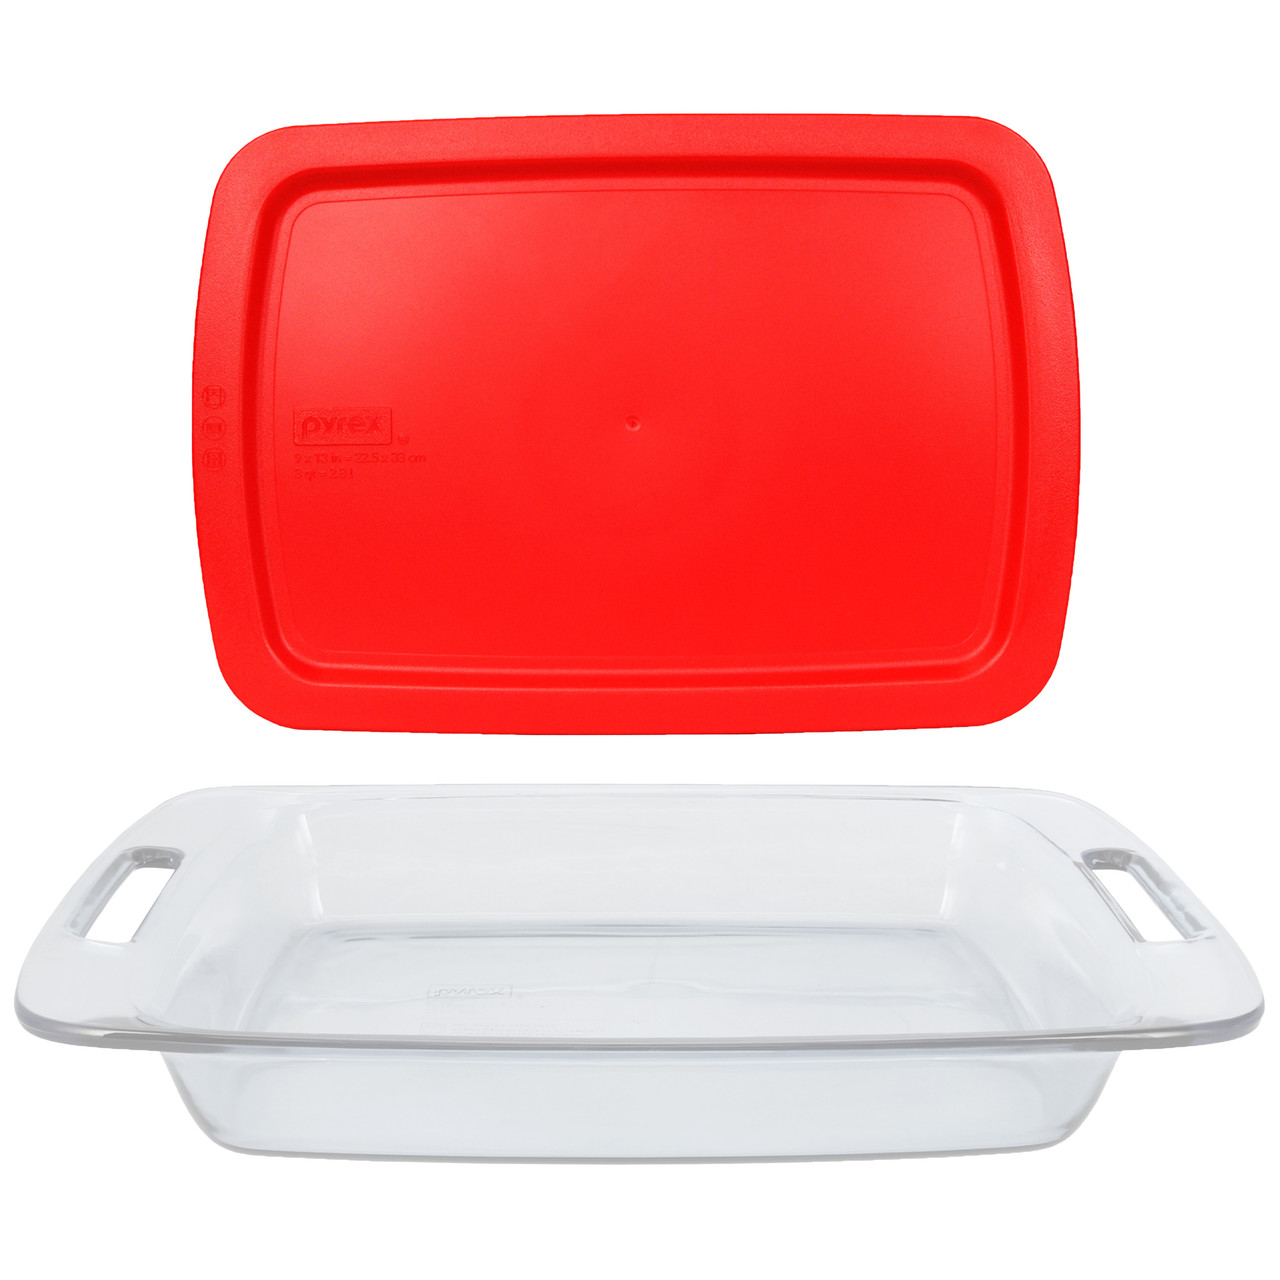 Pyrex 9-Piece On-The-Go Bundle with Glass Dishes, Lids, & Hot/Cold Packs